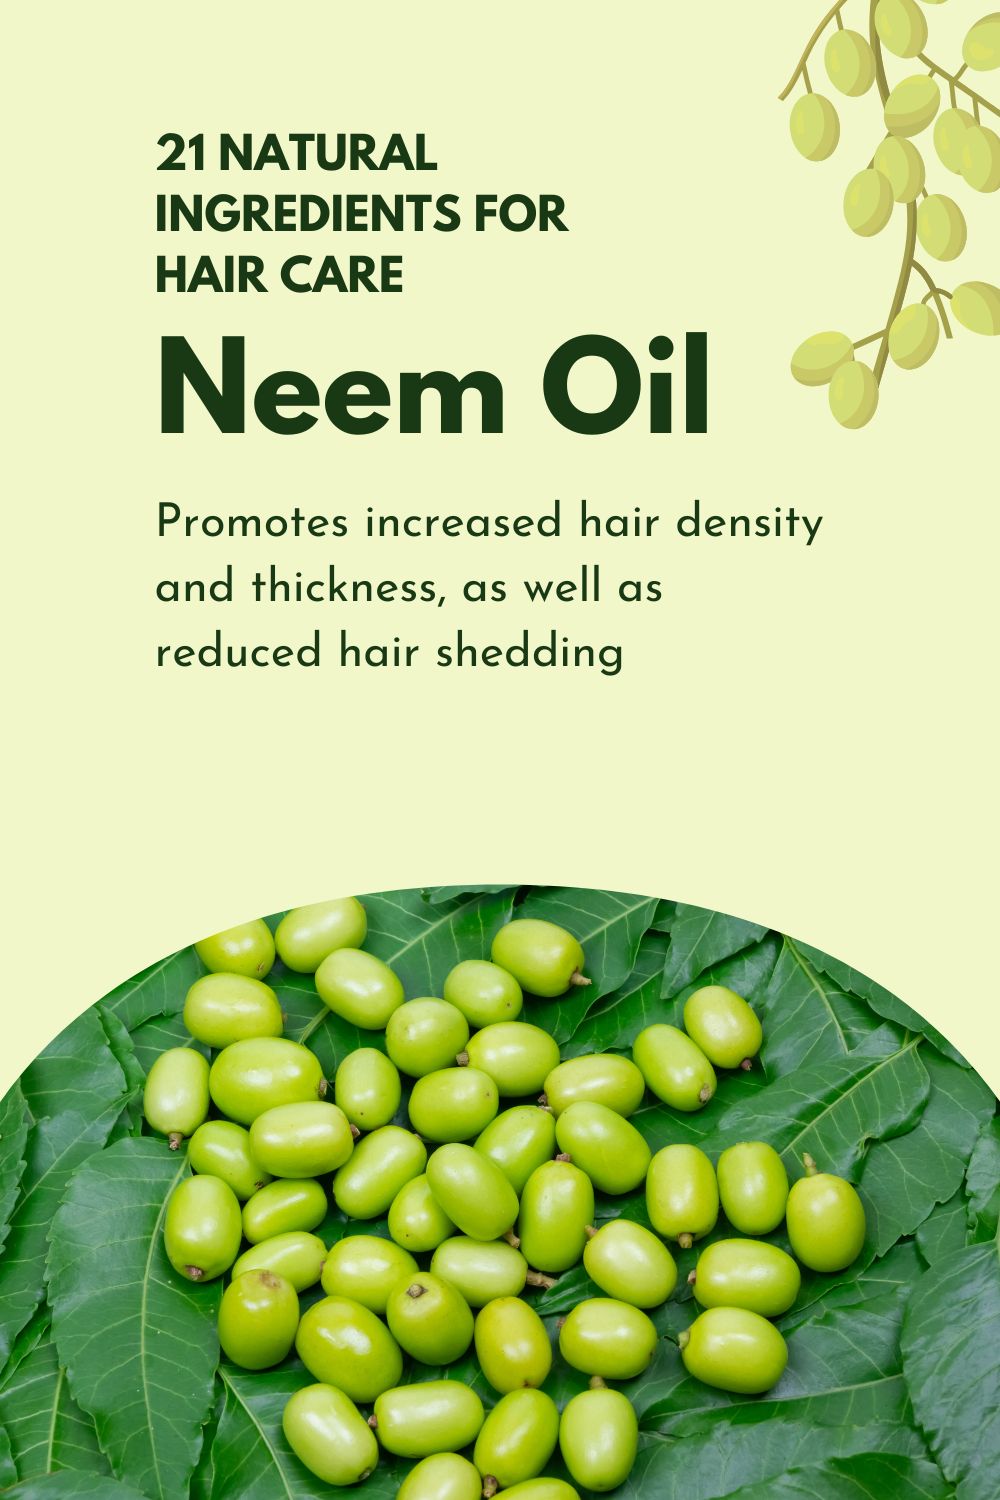 Neem Oil - Promotes increase hair density and thickness, as well as reduced hair shedding